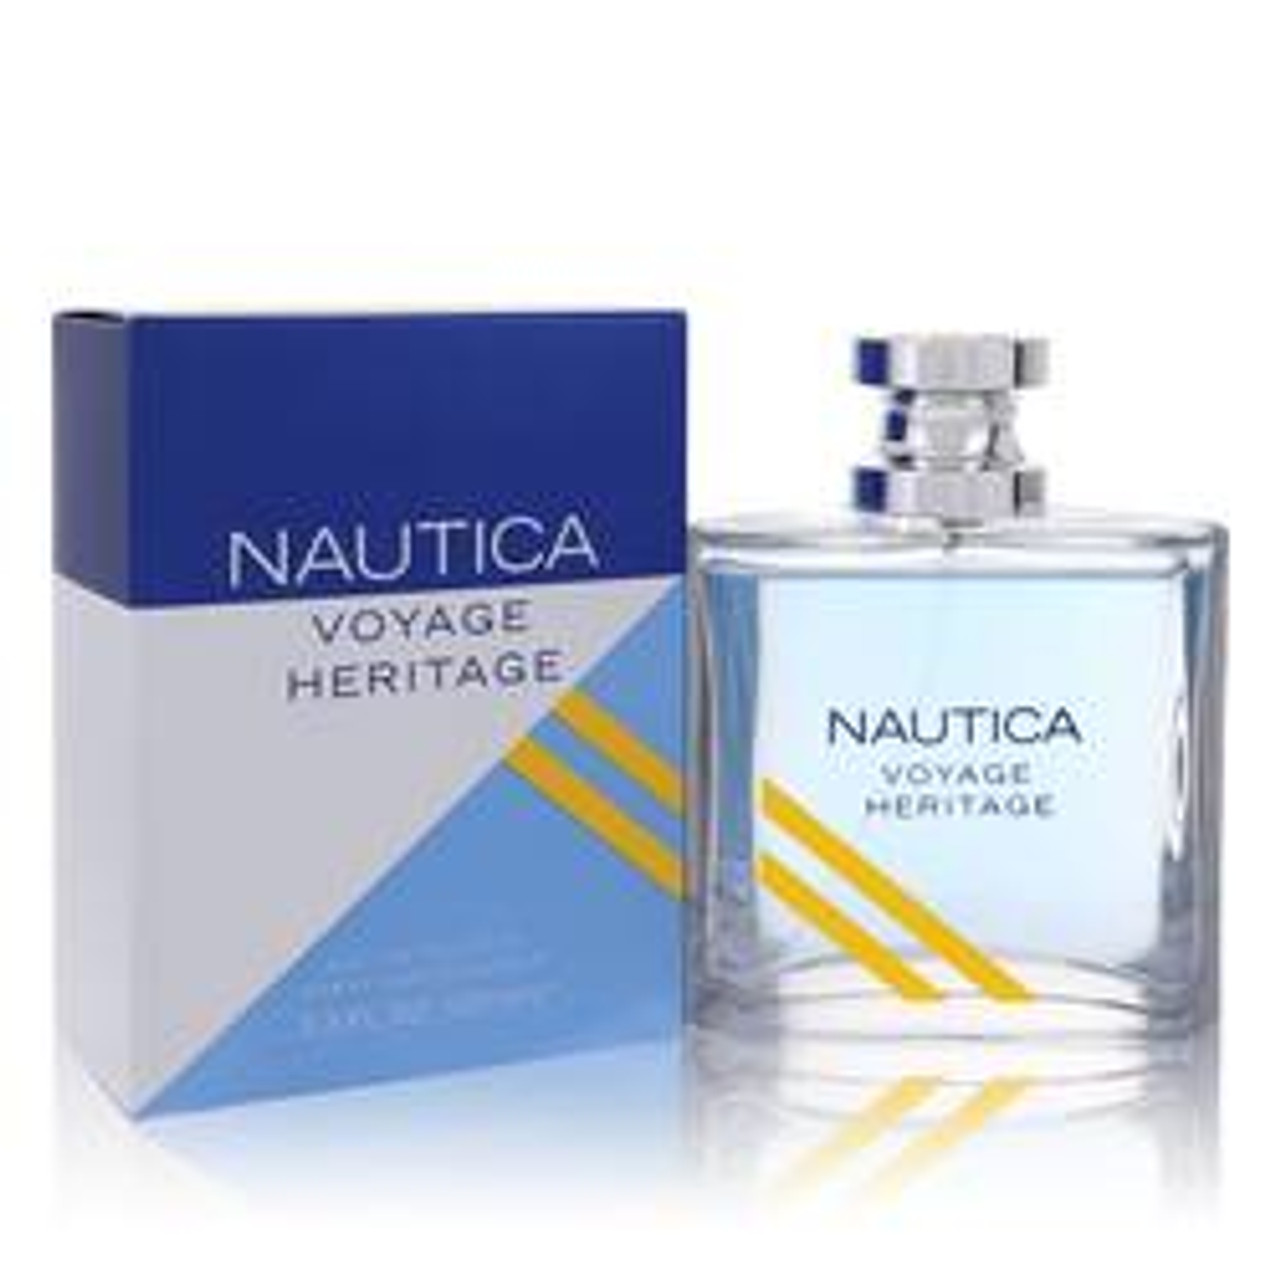 Nautica Voyage Heritage Cologne By Nautica Eau De Toilette Spray 3.4 oz for Men - [From 59.00 - Choose pk Qty ] - *Ships from Miami